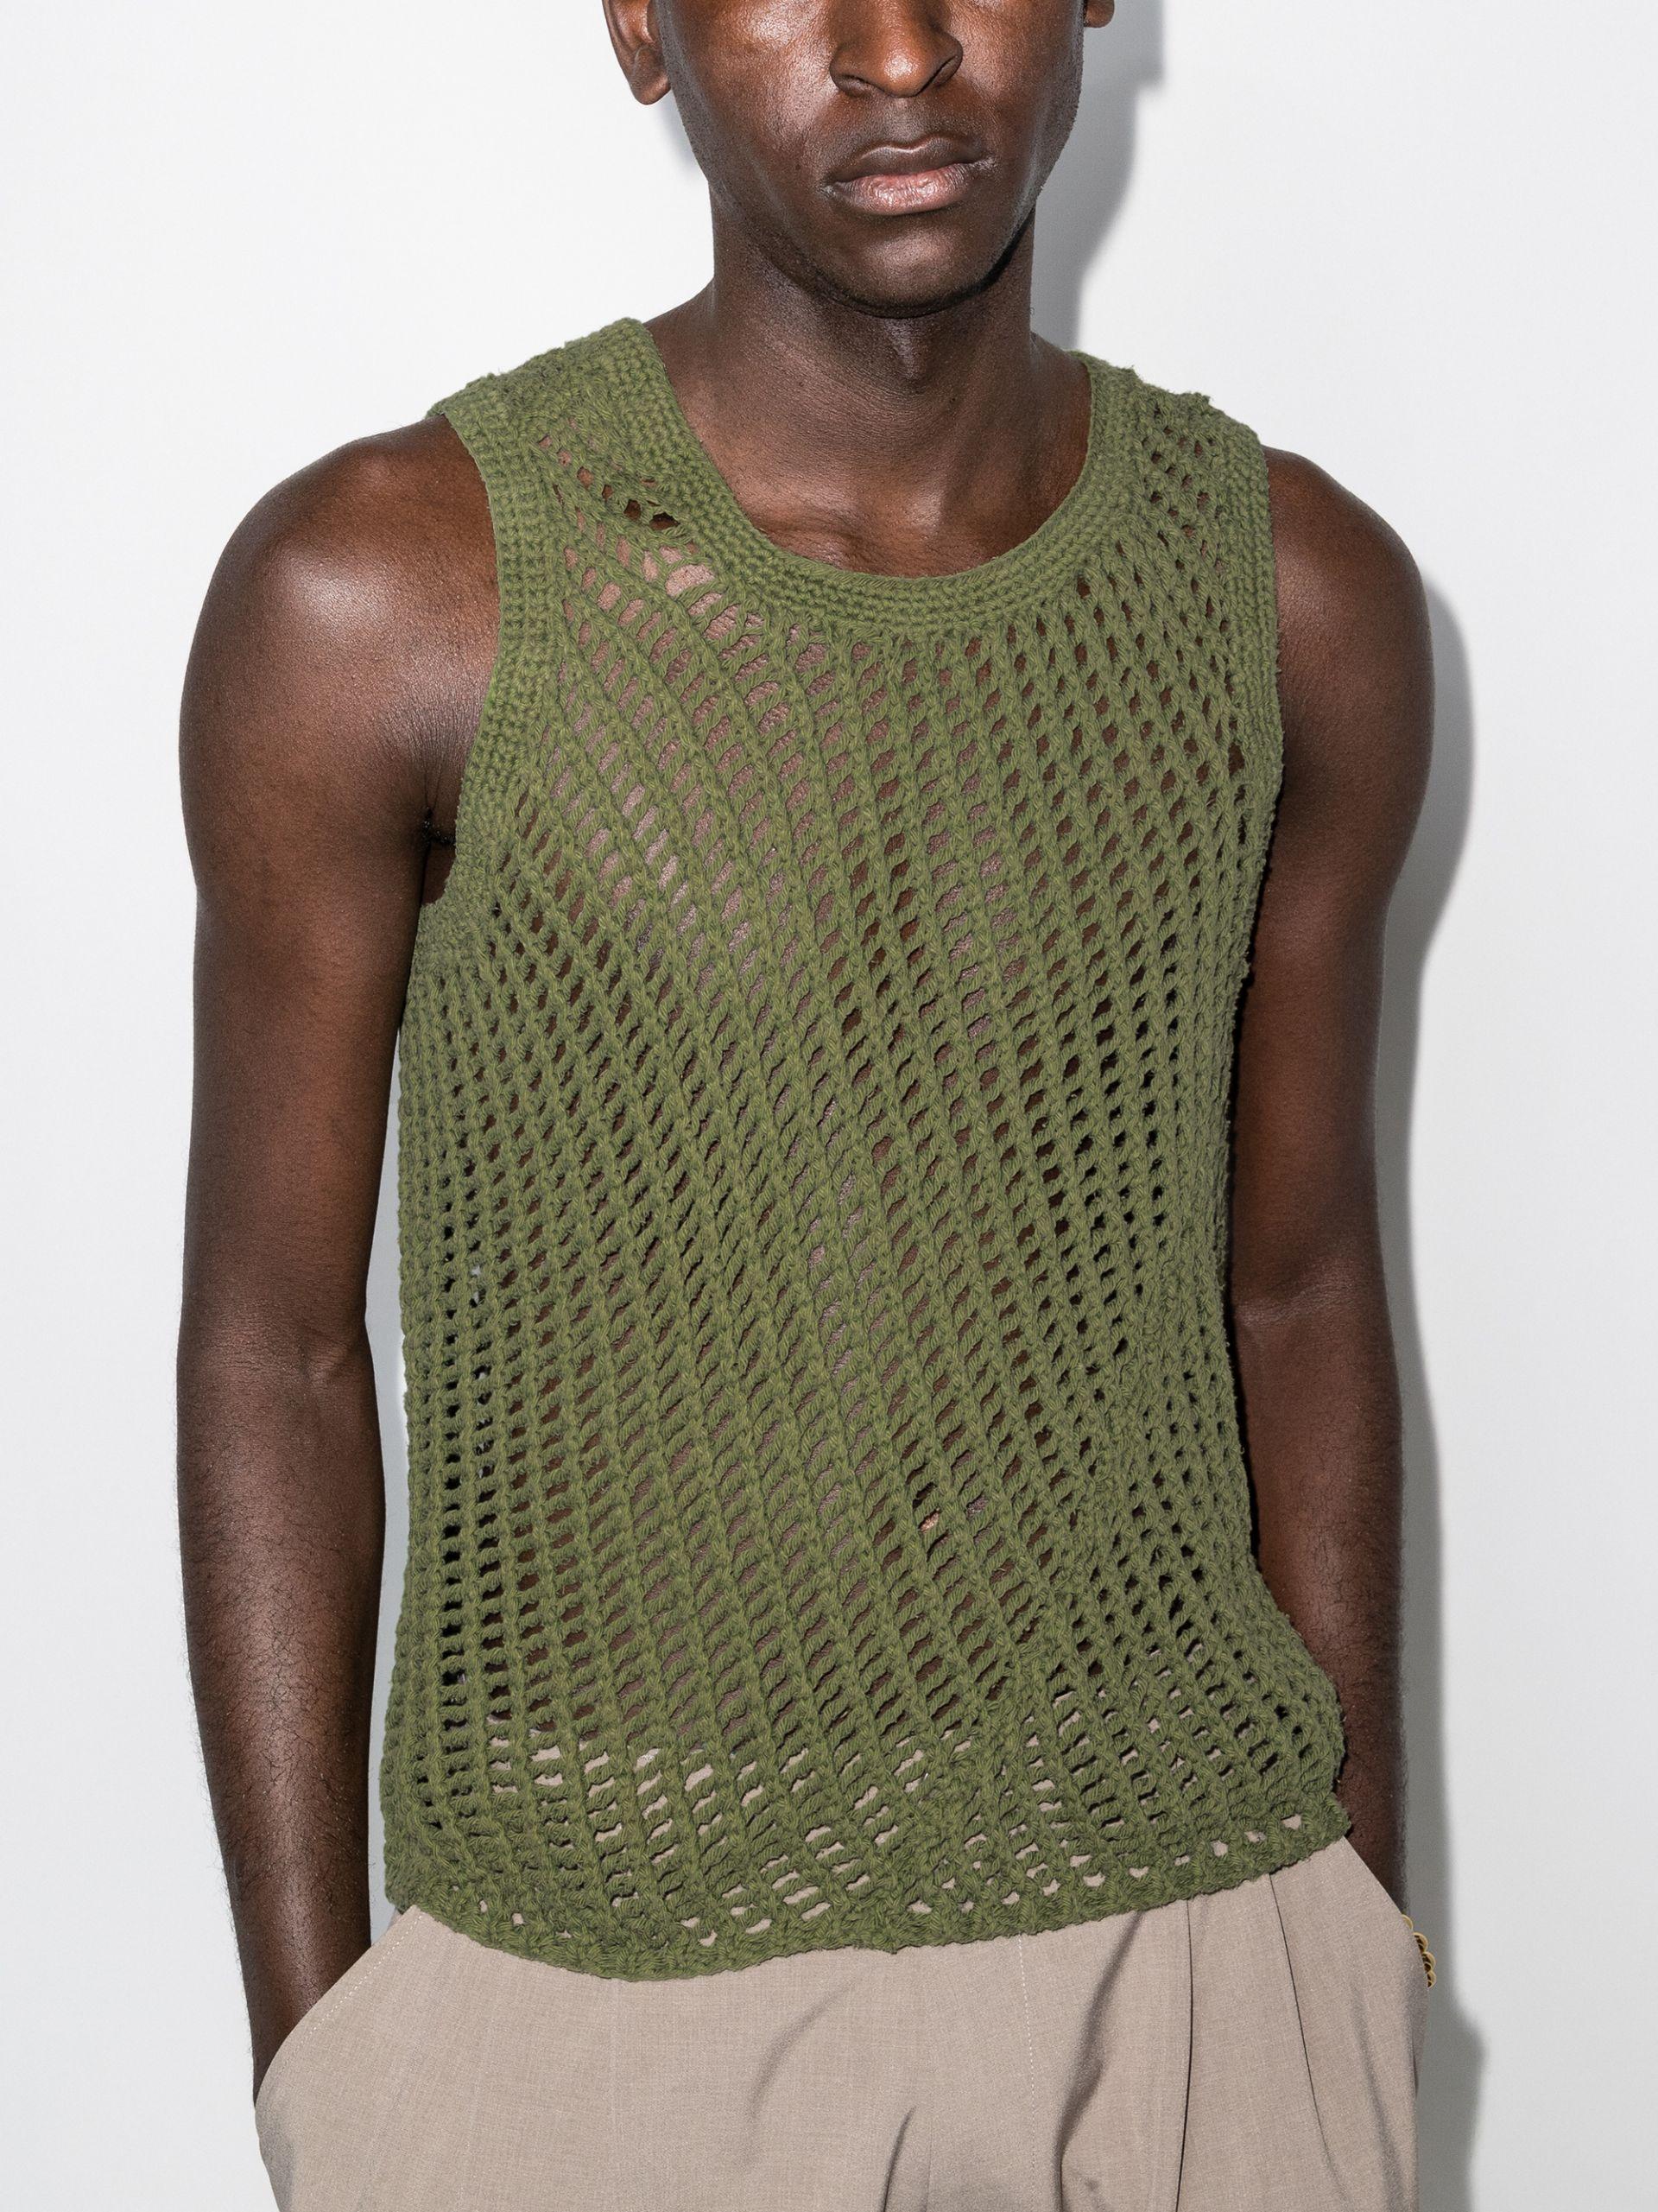 Nicholas Daley Cotton Knitted String Vest Top in Green for Men - Lyst